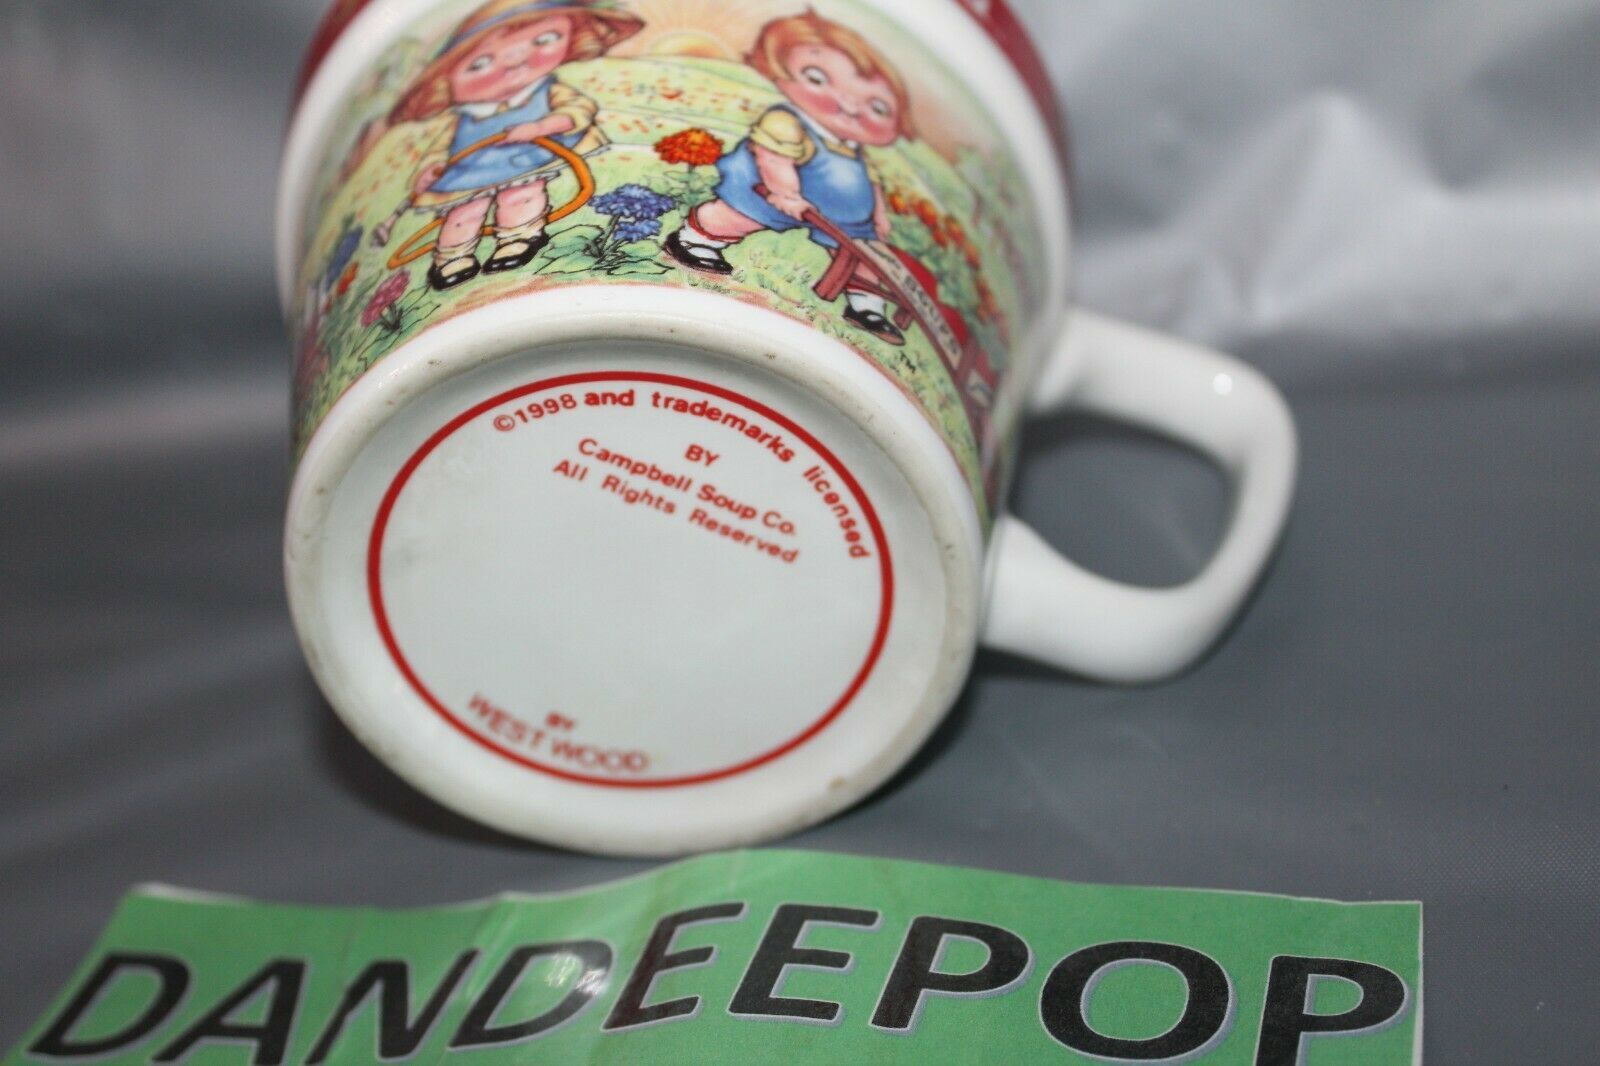 Campbell Soup Company, Dining, Campbells Soup Kids Mugs